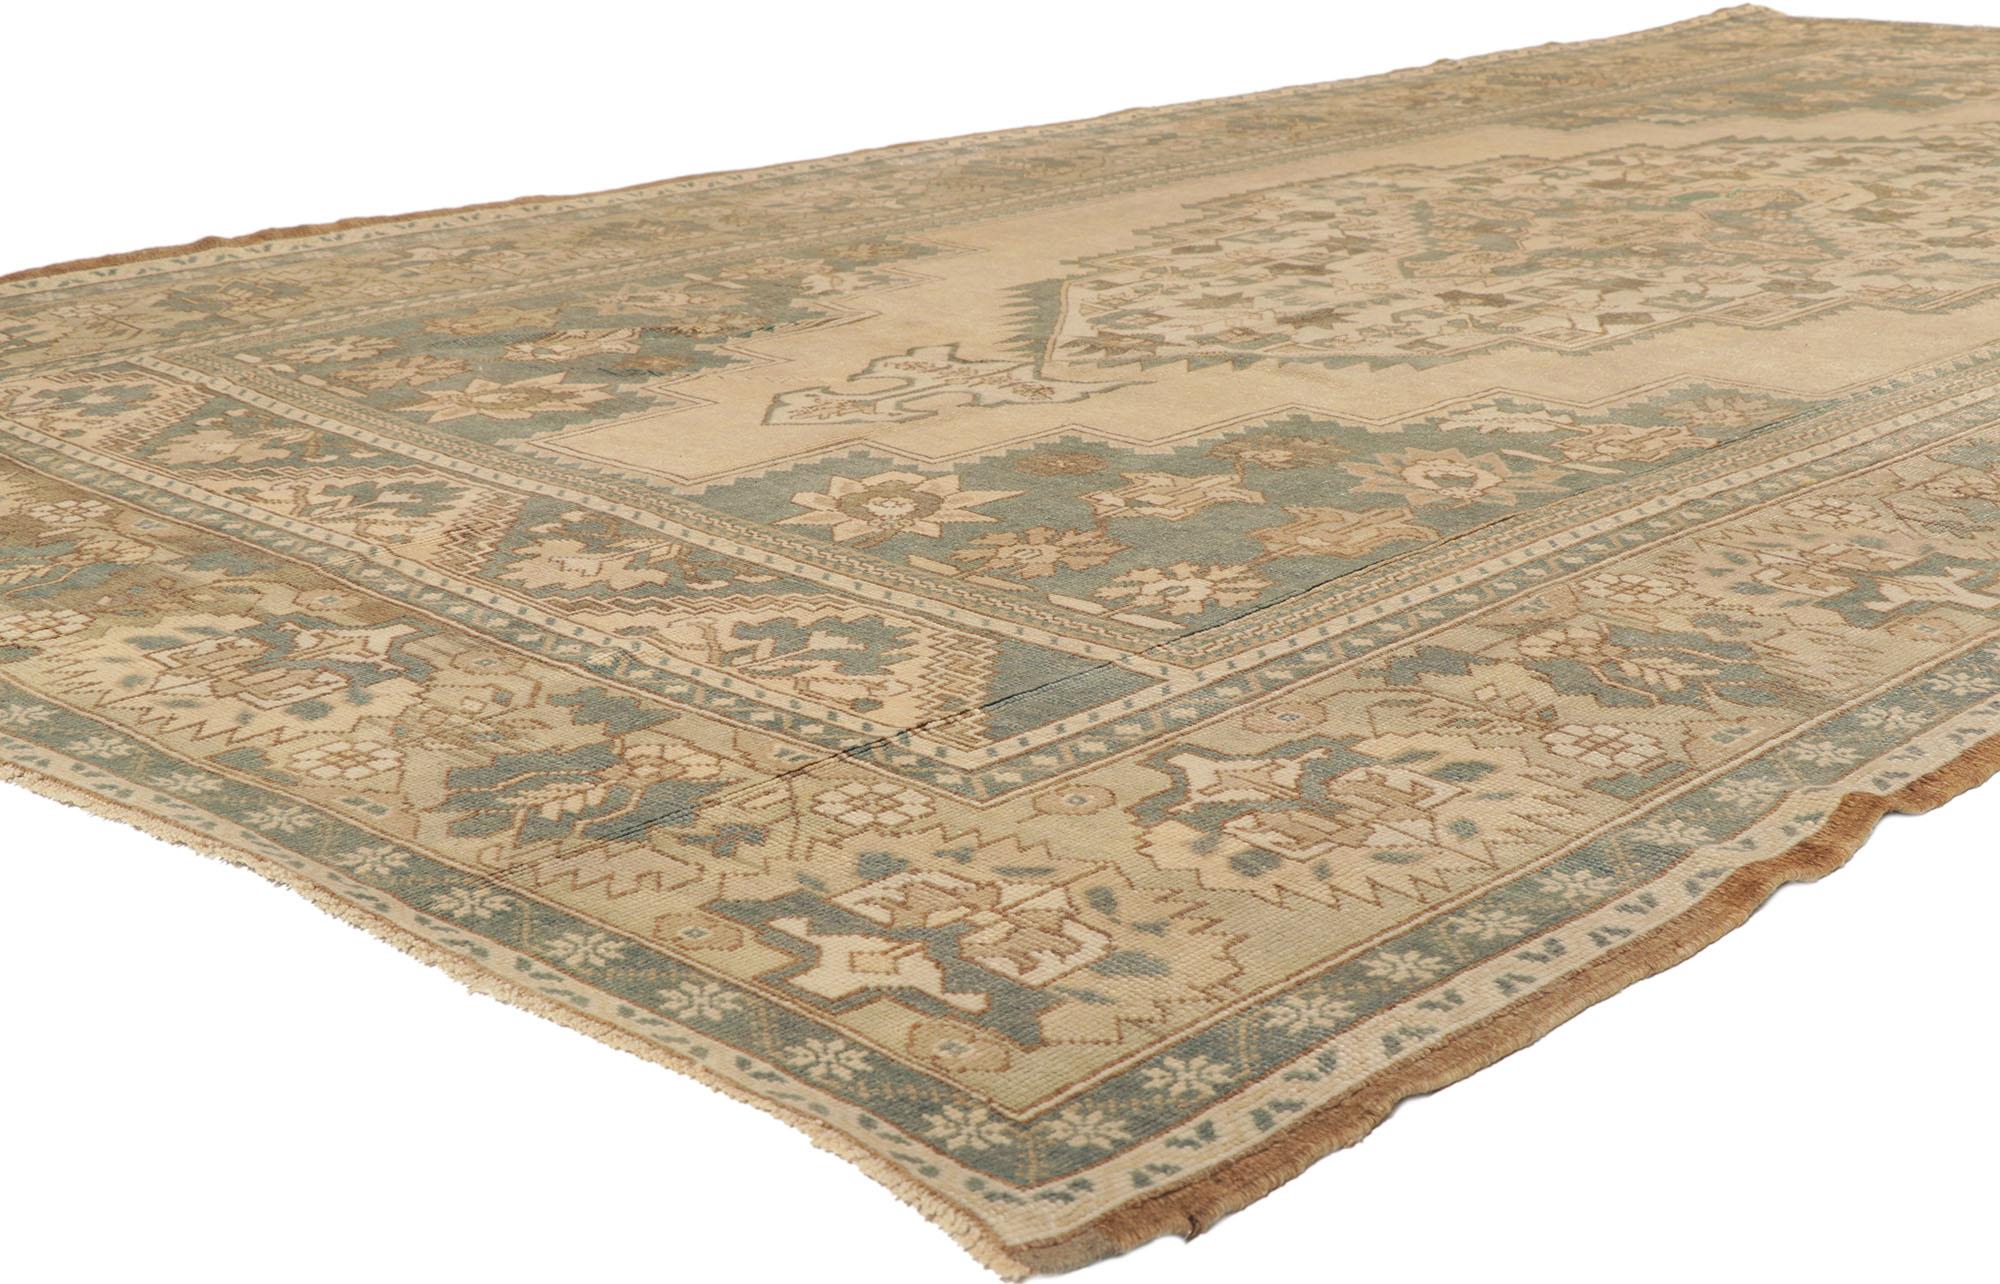 53685 vintage Turkish Oushak Gallery rug, 7'04 x 13'02.
Abrash. Antique wash. Hand-knotted wool. Made in Turkey.